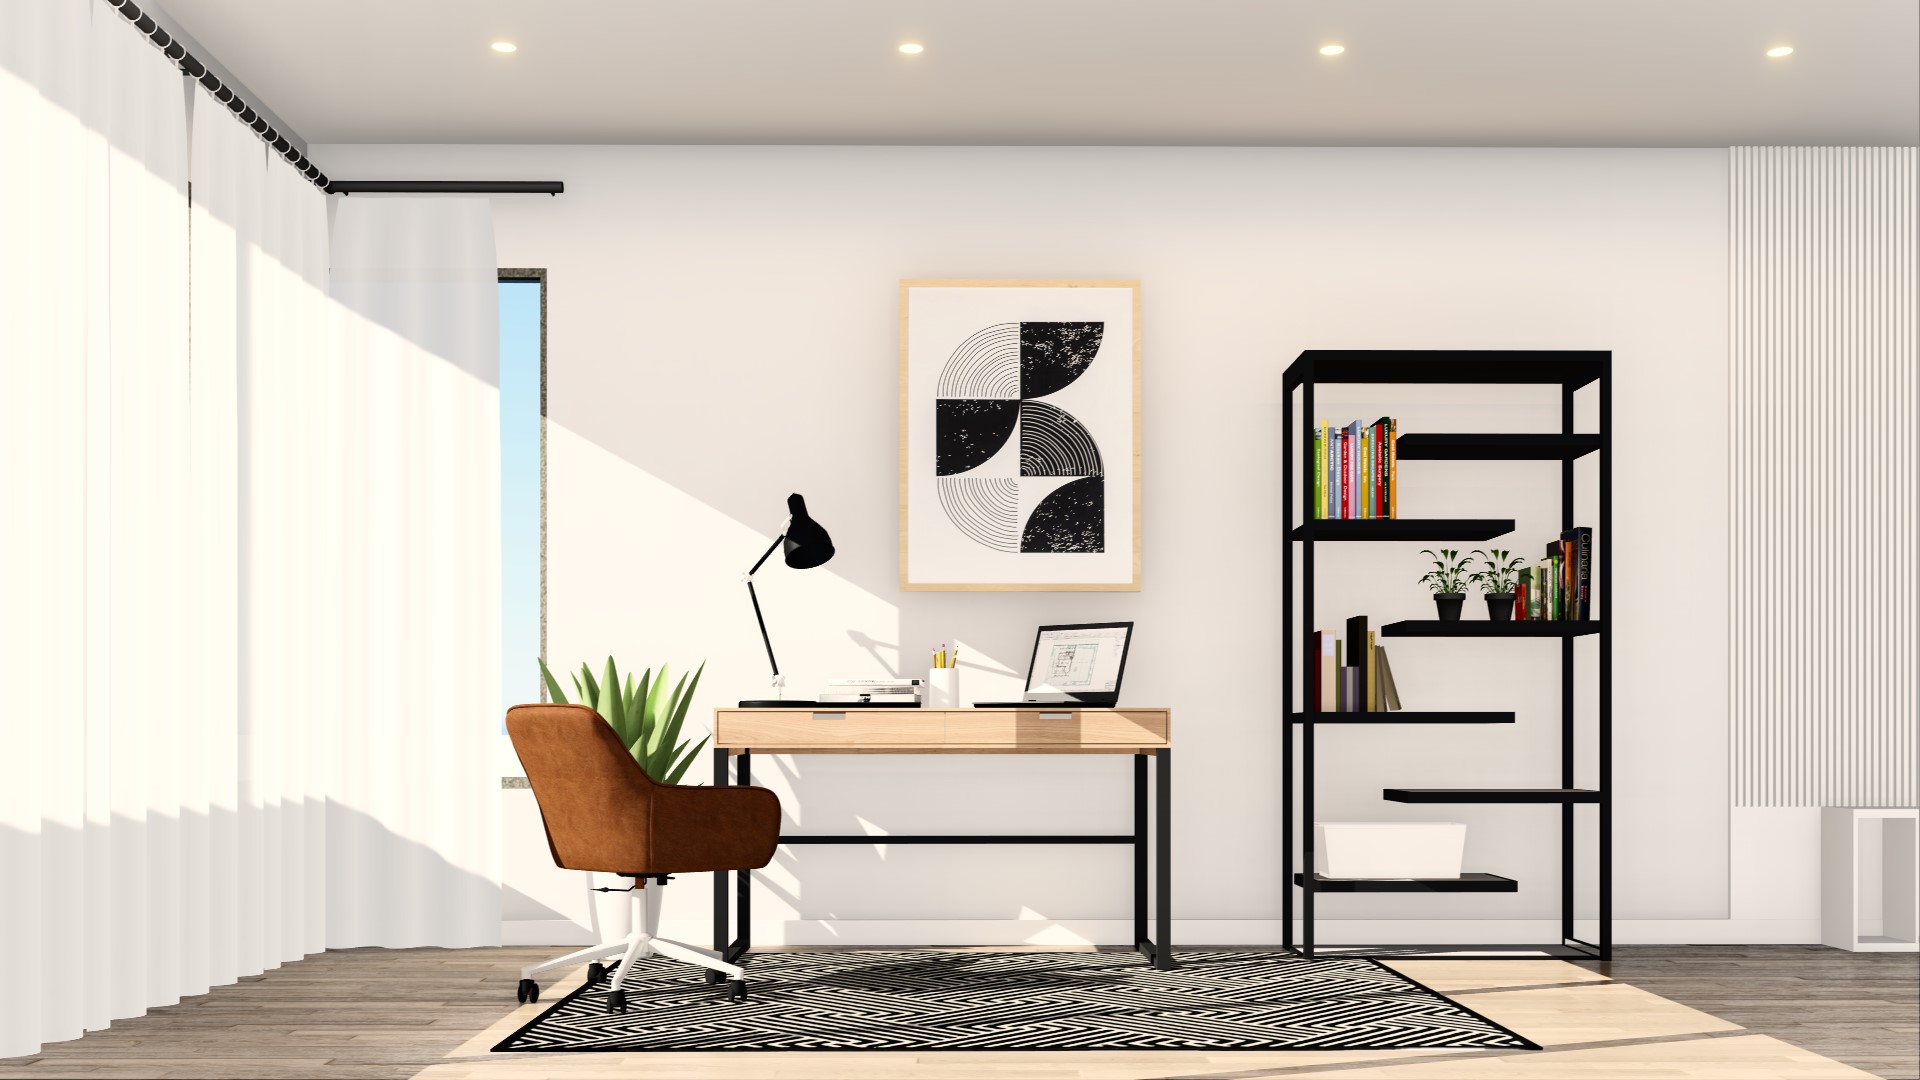 Get a super slick Industrial style home office design easily